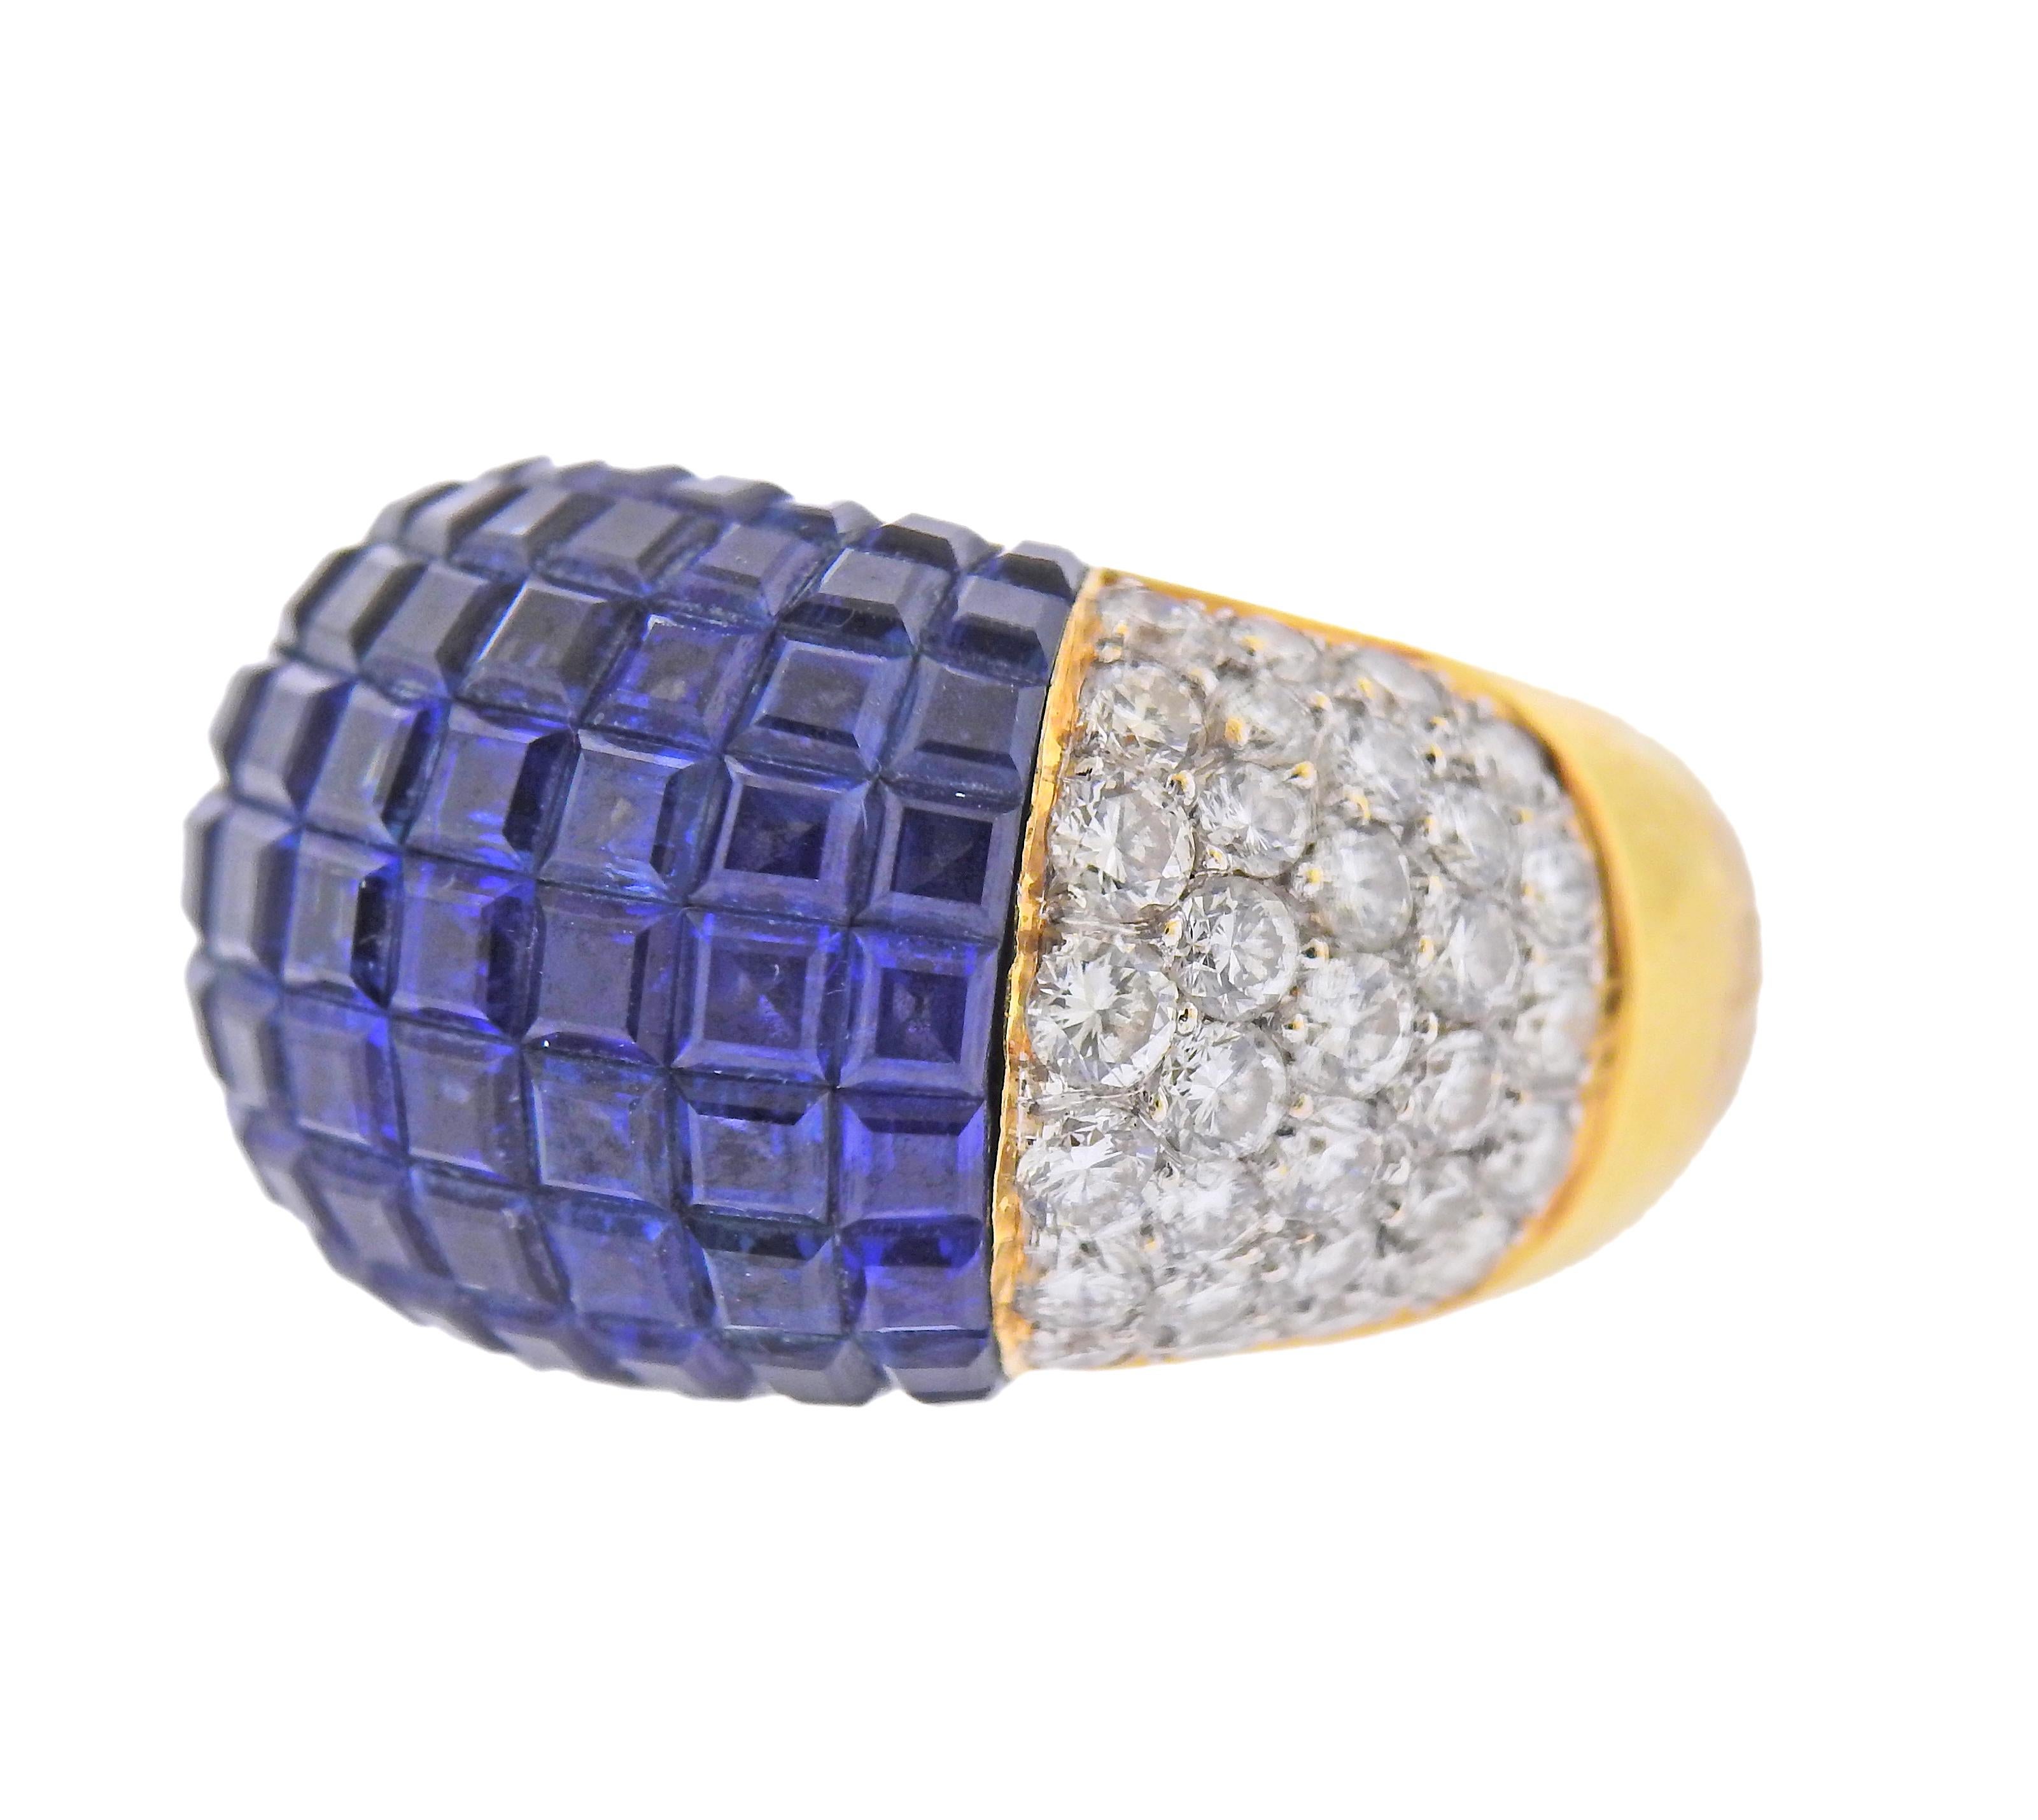 18k gold ring, with invisible set blue sapphires and 2.10ctw in diamonds. Ring size - 6.75, ring top - 15mm wide. Marked: 750, D2.10. Weight - 17 grams.